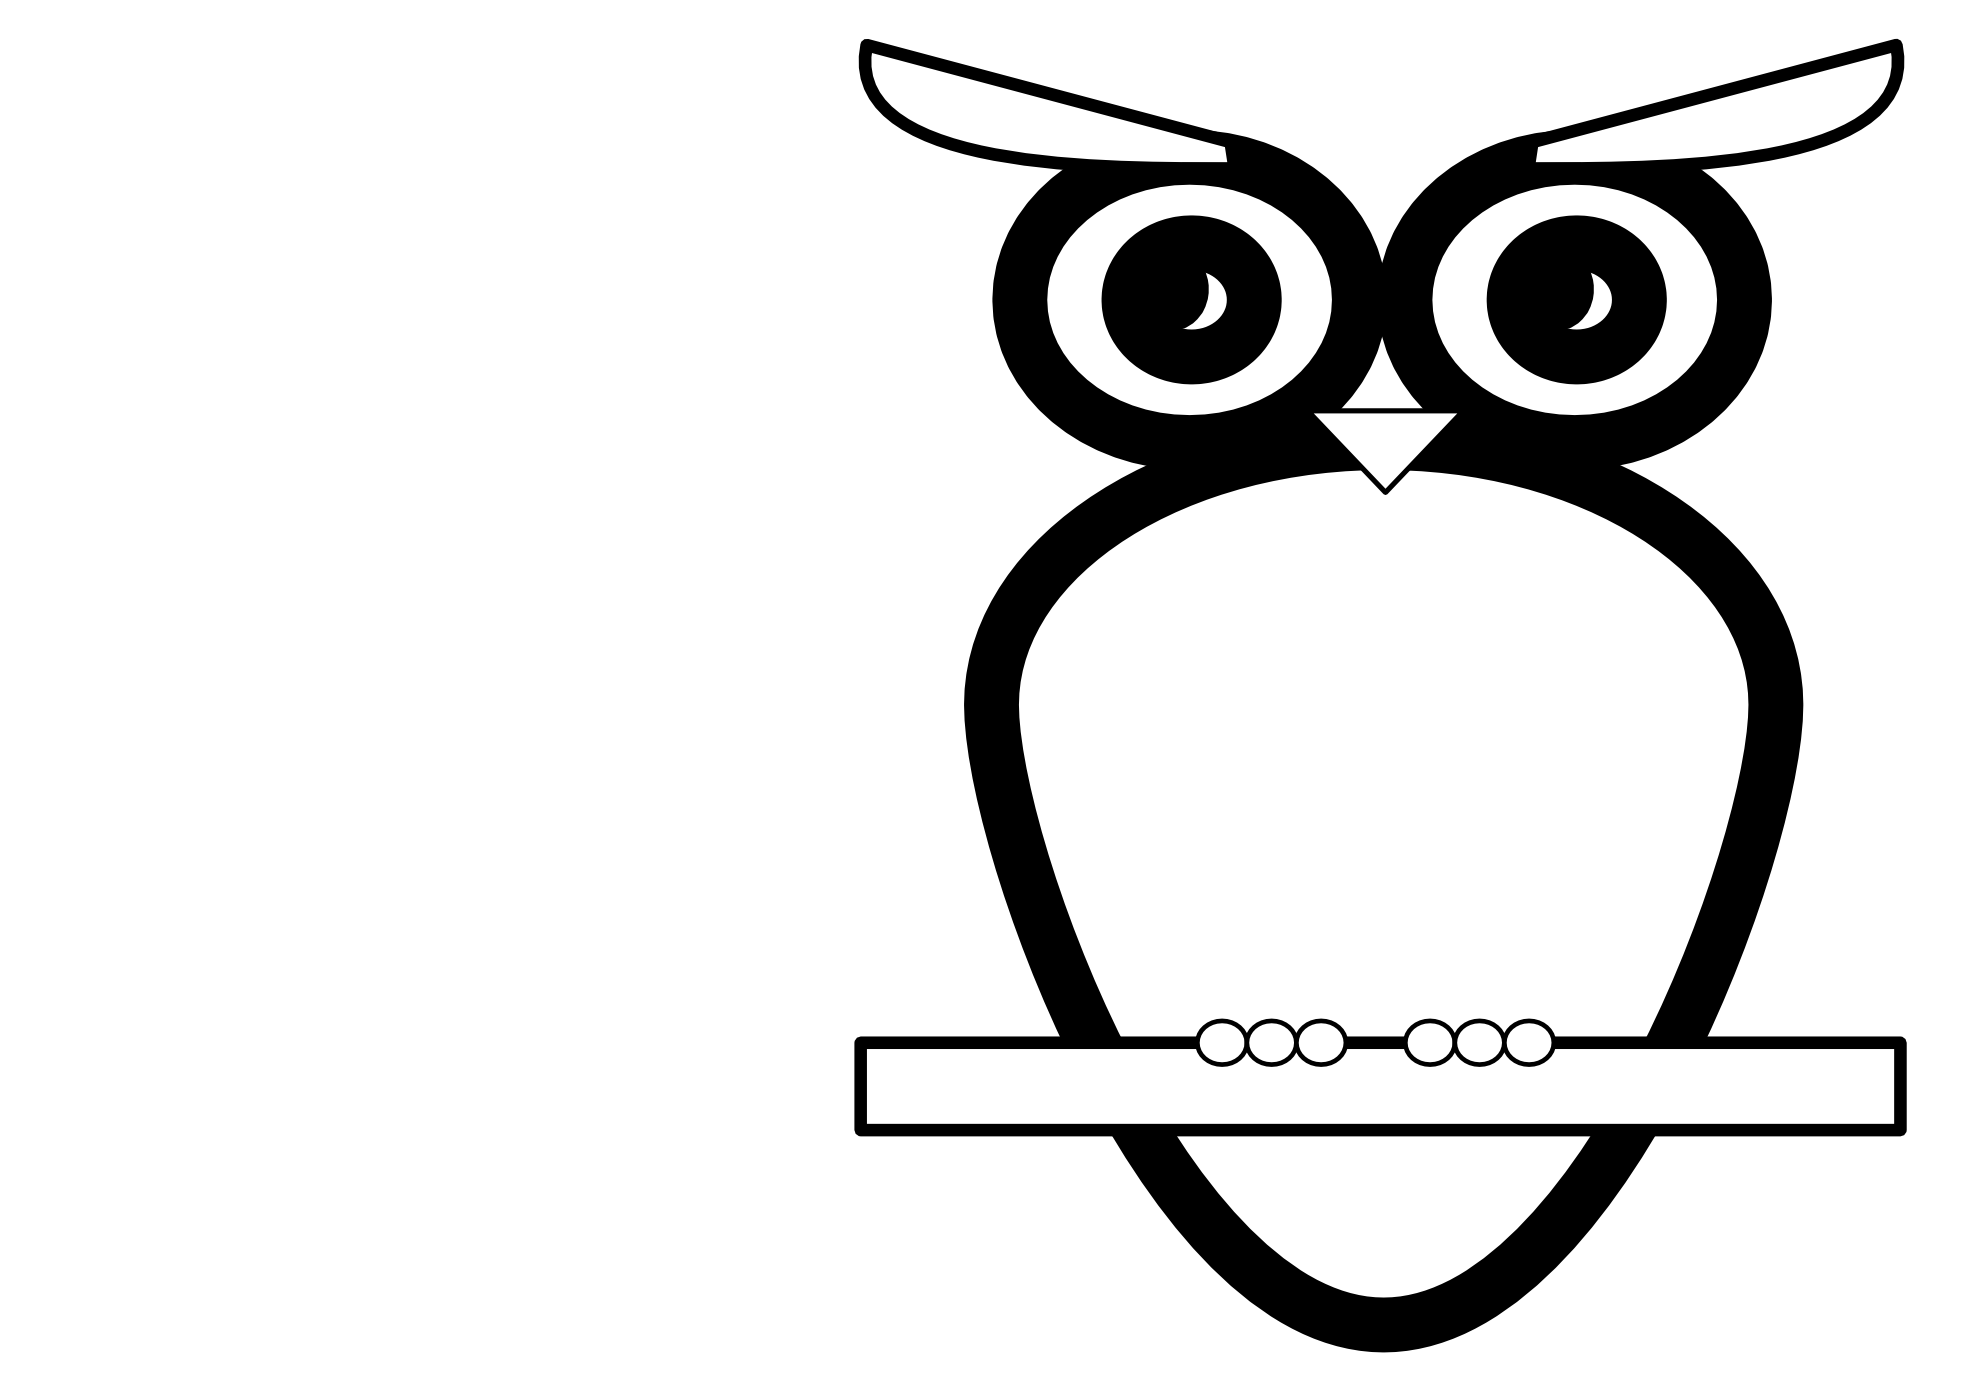 clipart owl black and white - photo #37